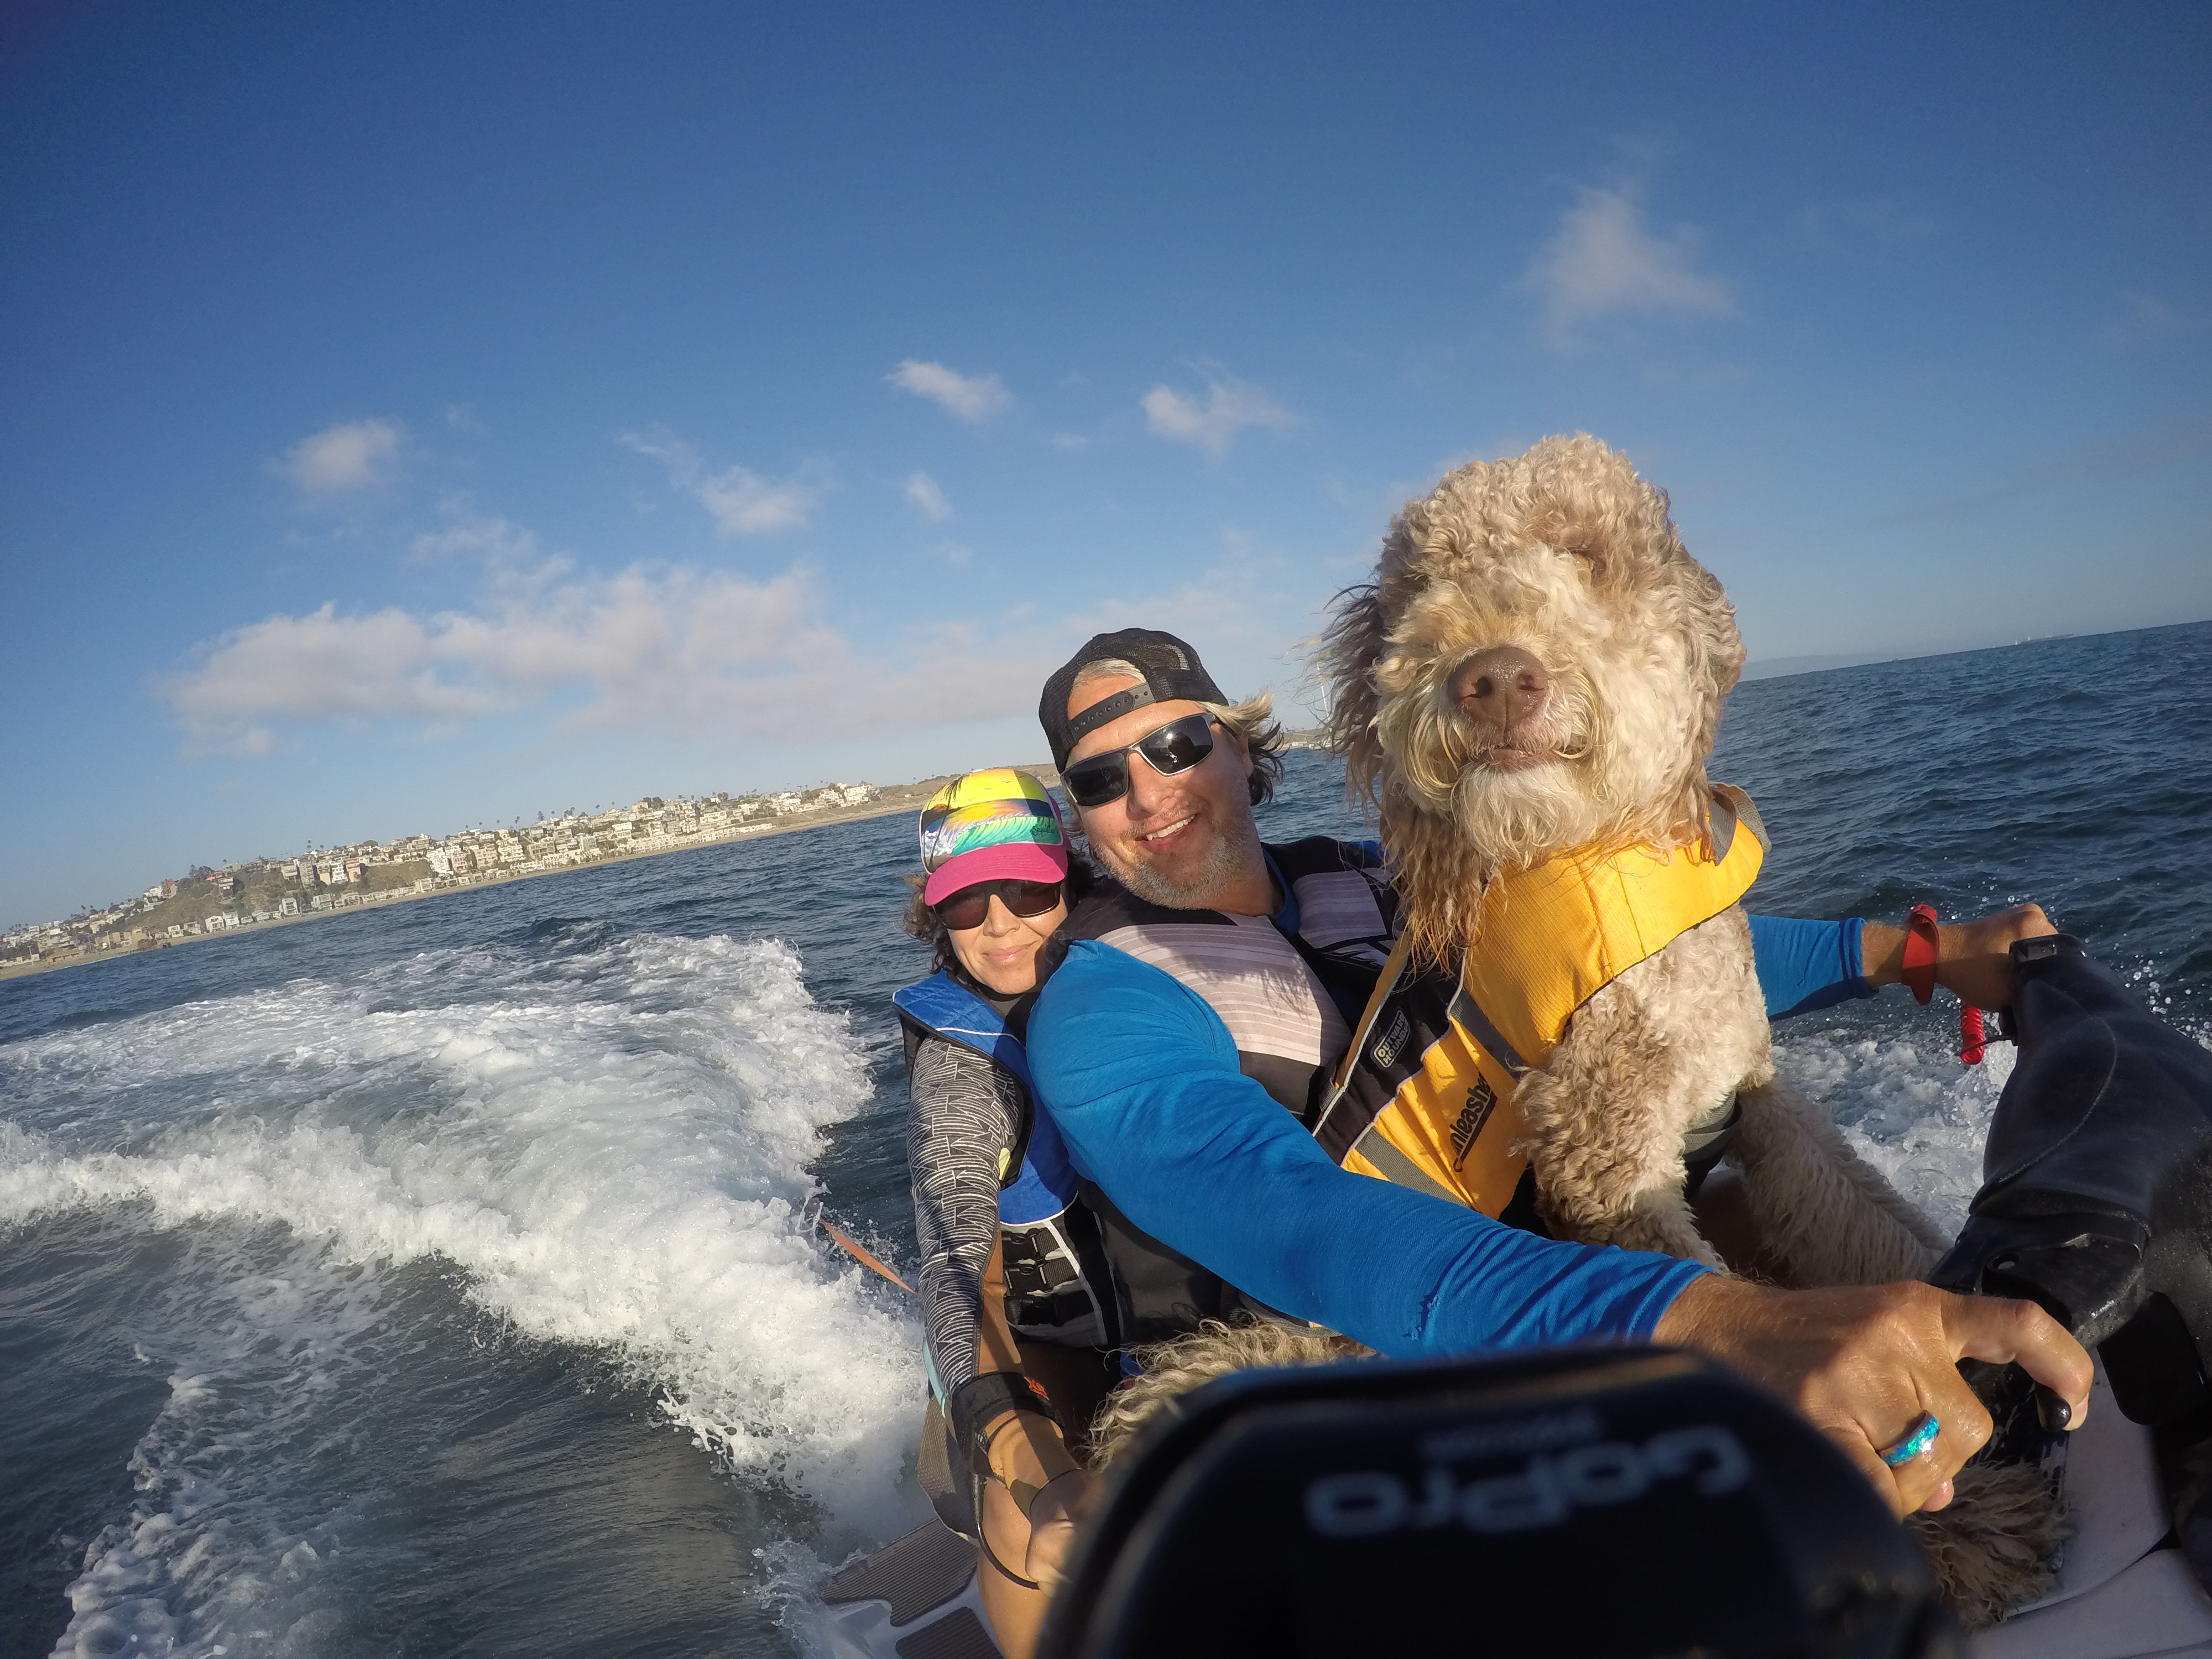 Aussiedoodle Kula and owner Syd on a wave runner